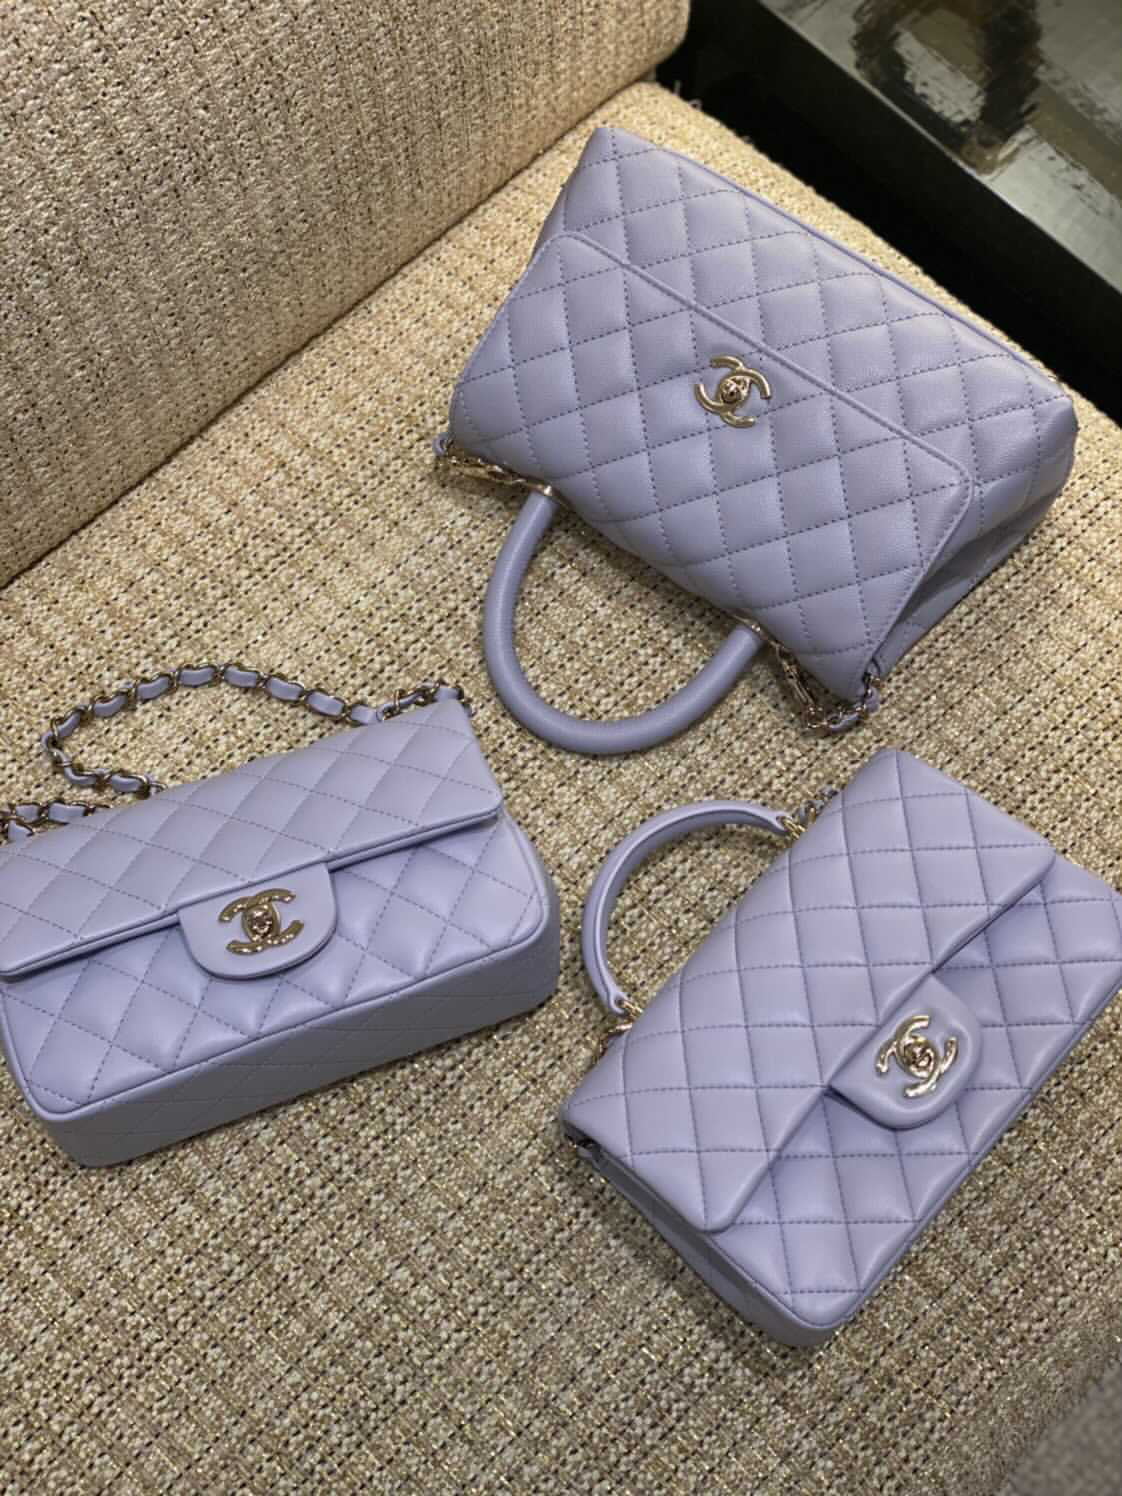 New Chanel Classic Flap Colors Coming for Fall 2021 - PurseBop